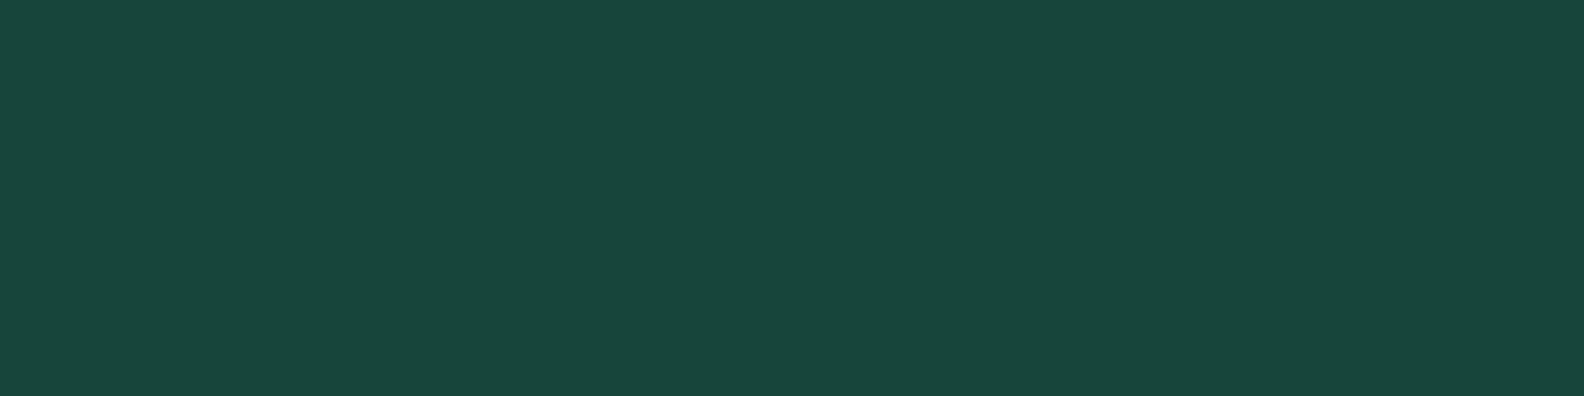 1584x396 MSU Green Solid Color Background